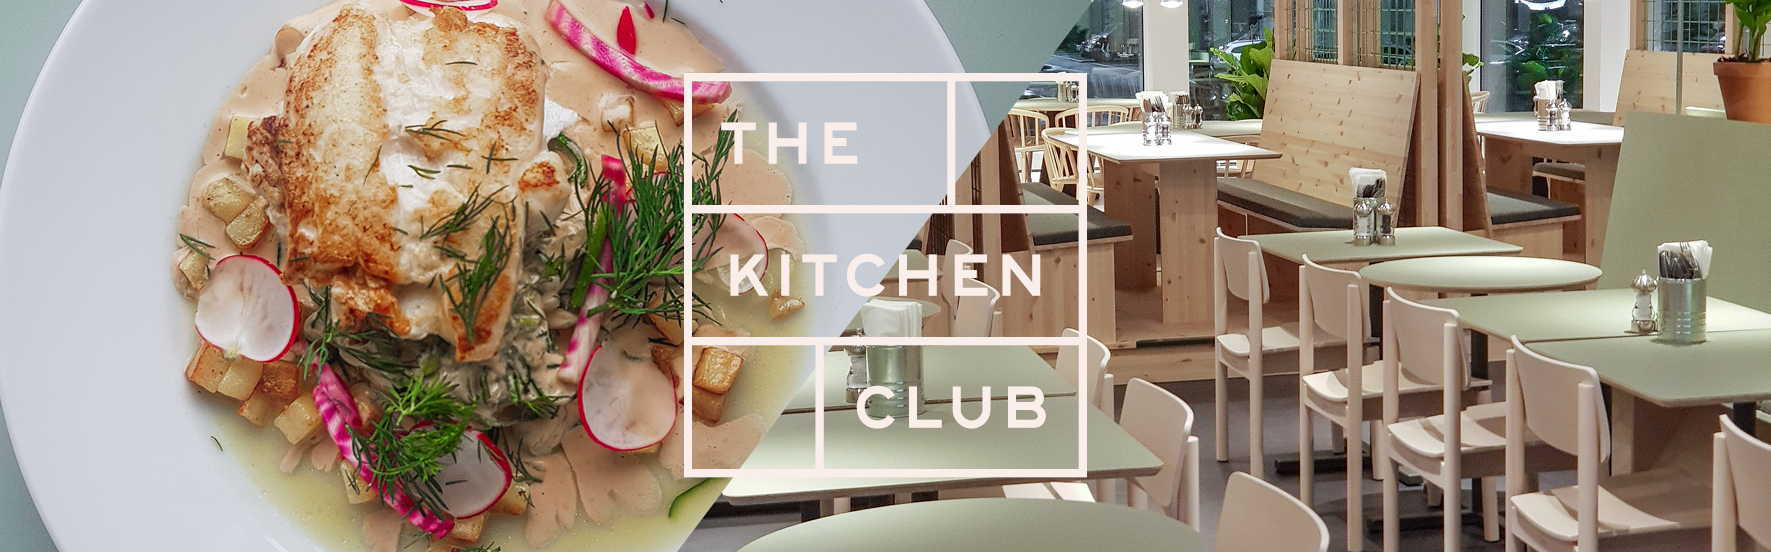 The kitchen club | Coor